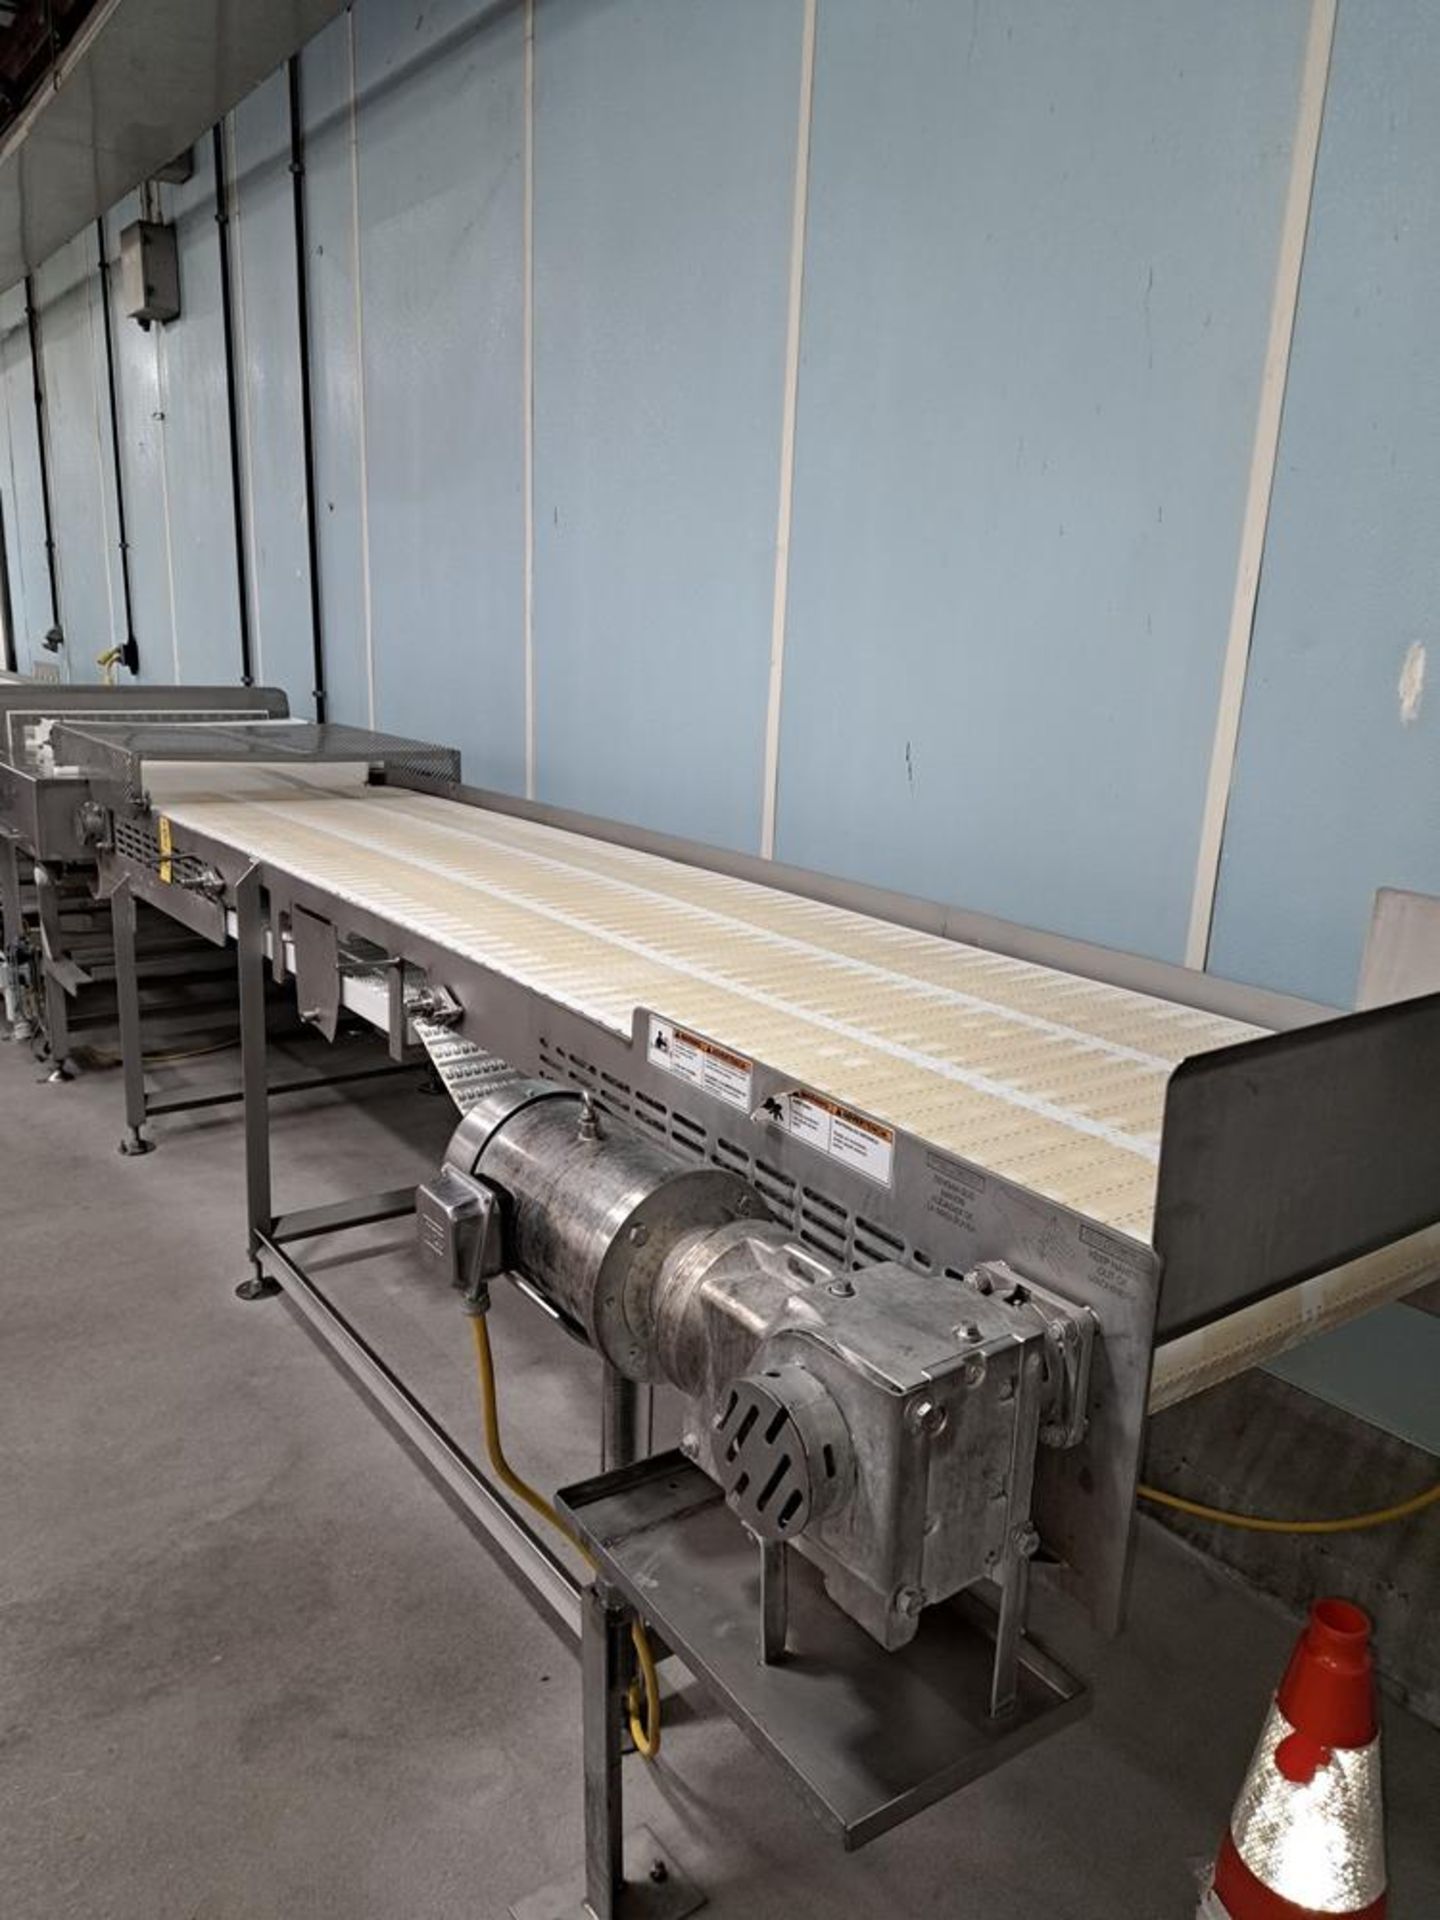 Belly Transfer Conveyor, 32" W X 12' L intralox belt: Required Loading Fee $400.00, Rigger-Norm - Image 2 of 2